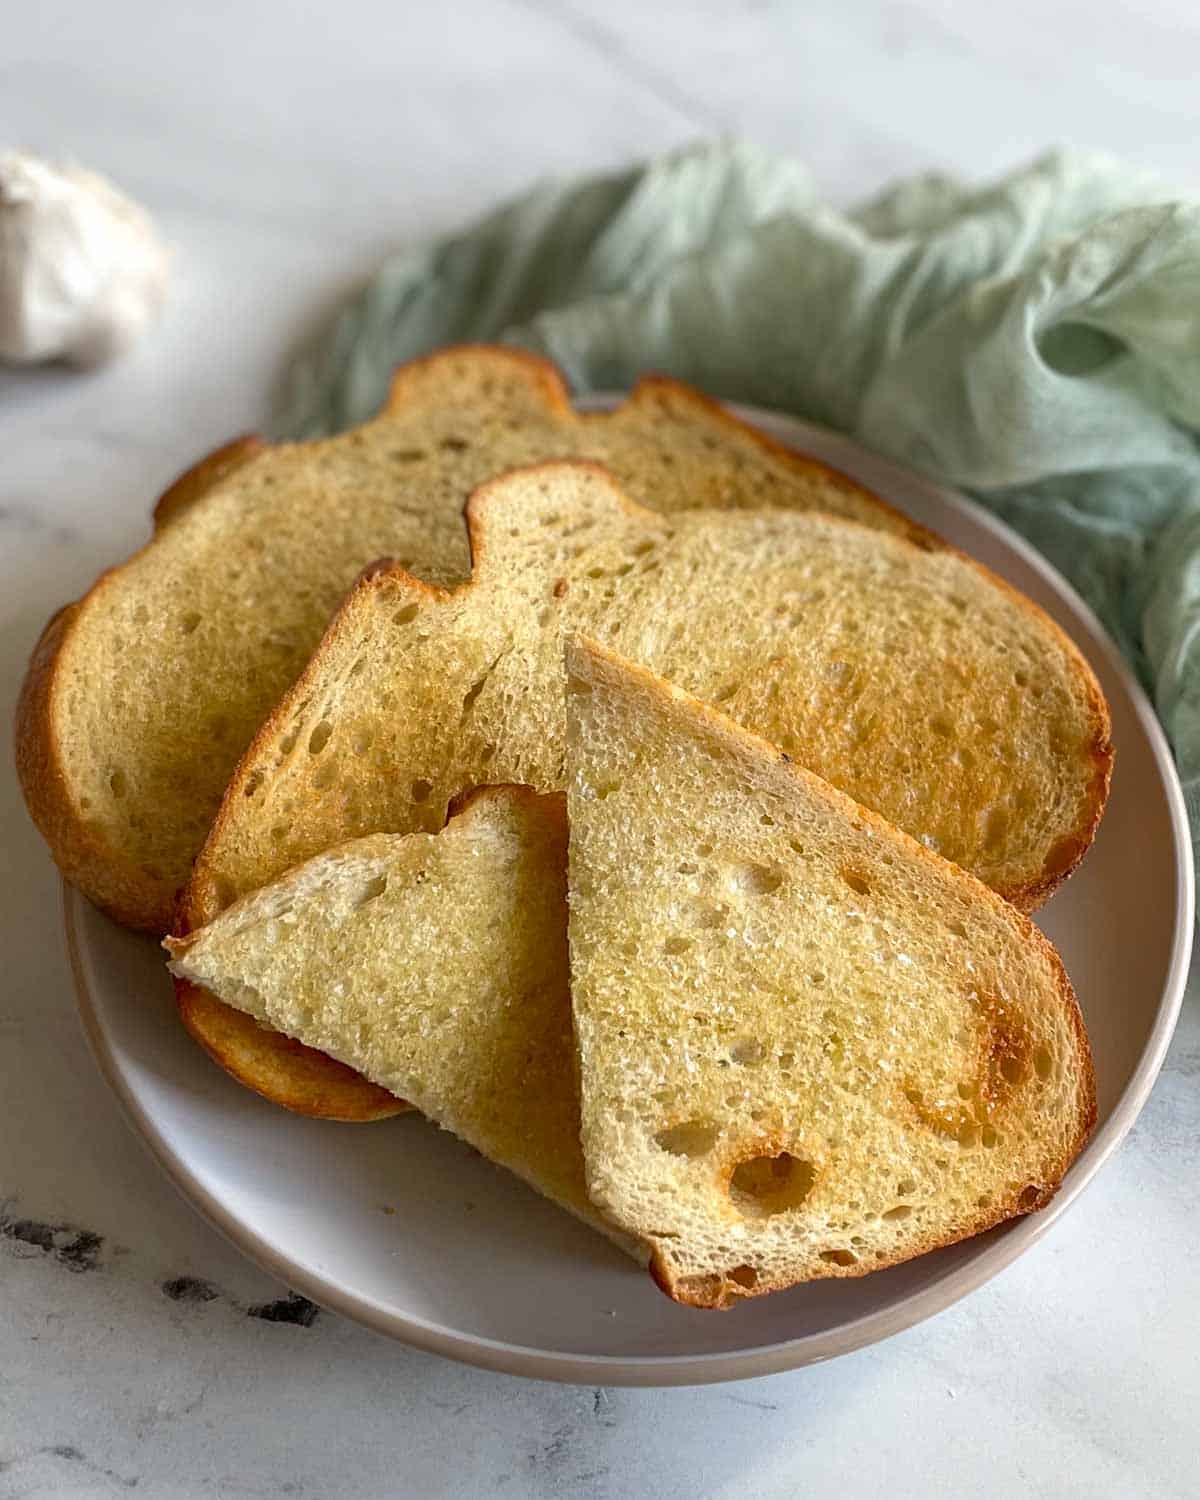 Three slices of toasted bread are shown on a white plate on a white marble counter with a light green linen.